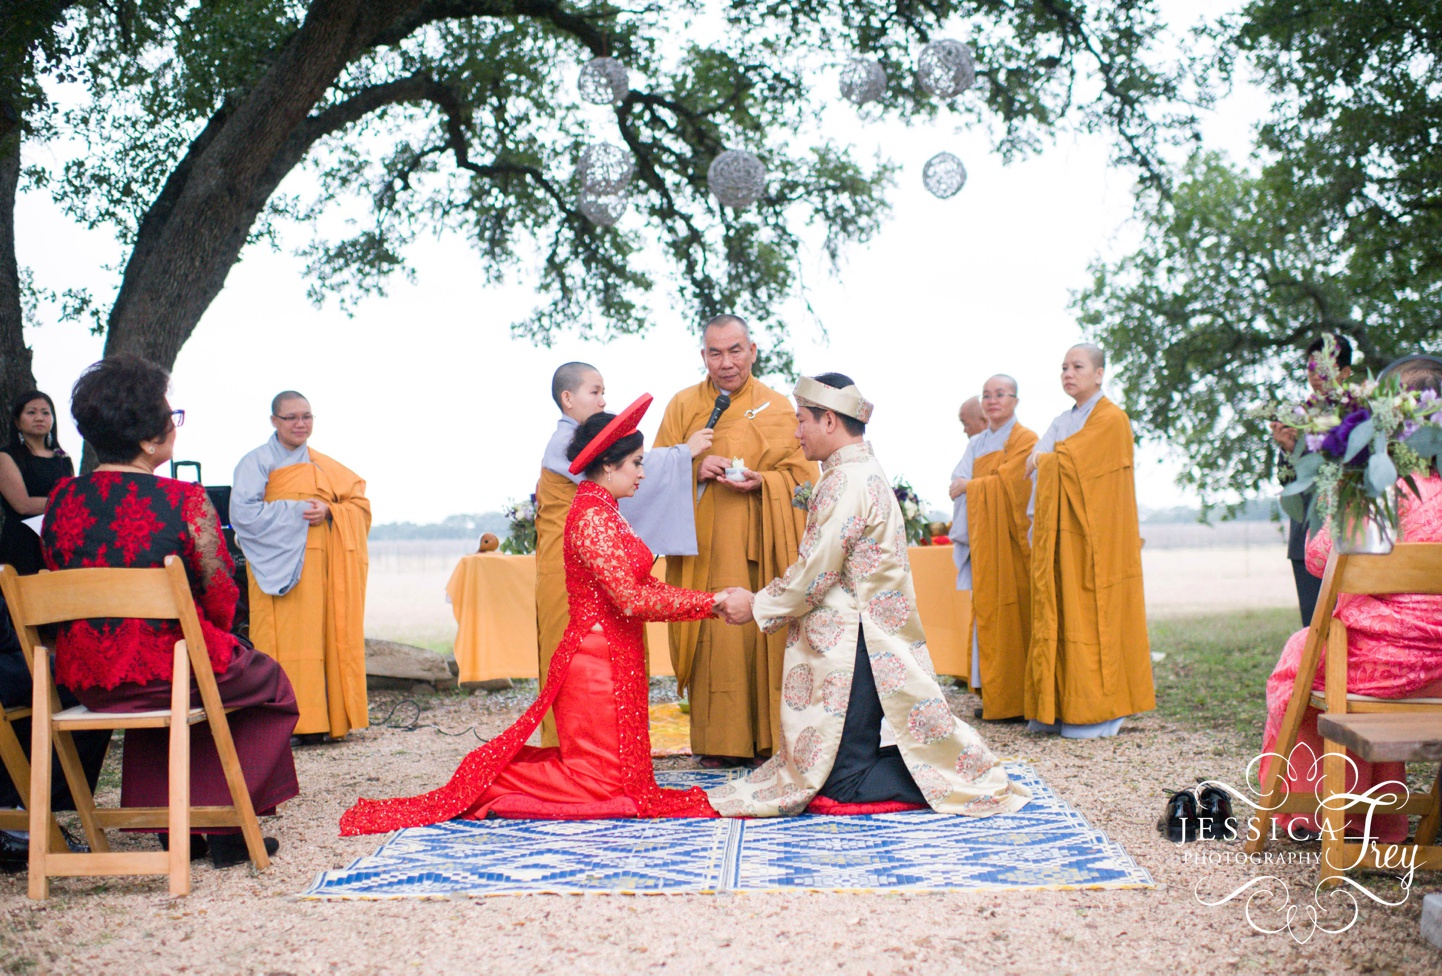 Jessica Frey Photography, Duchman Family Winery Wedding, Driftwood wedding venue, Hill Country wedding, Austin wedding photographer, HilL Country wedding photographer, Duchman Winery wedding photographer, Vietnamese wedding, Austin vietnamese wedding ceremony, vietnamese bride, Tiffany & Long Huang